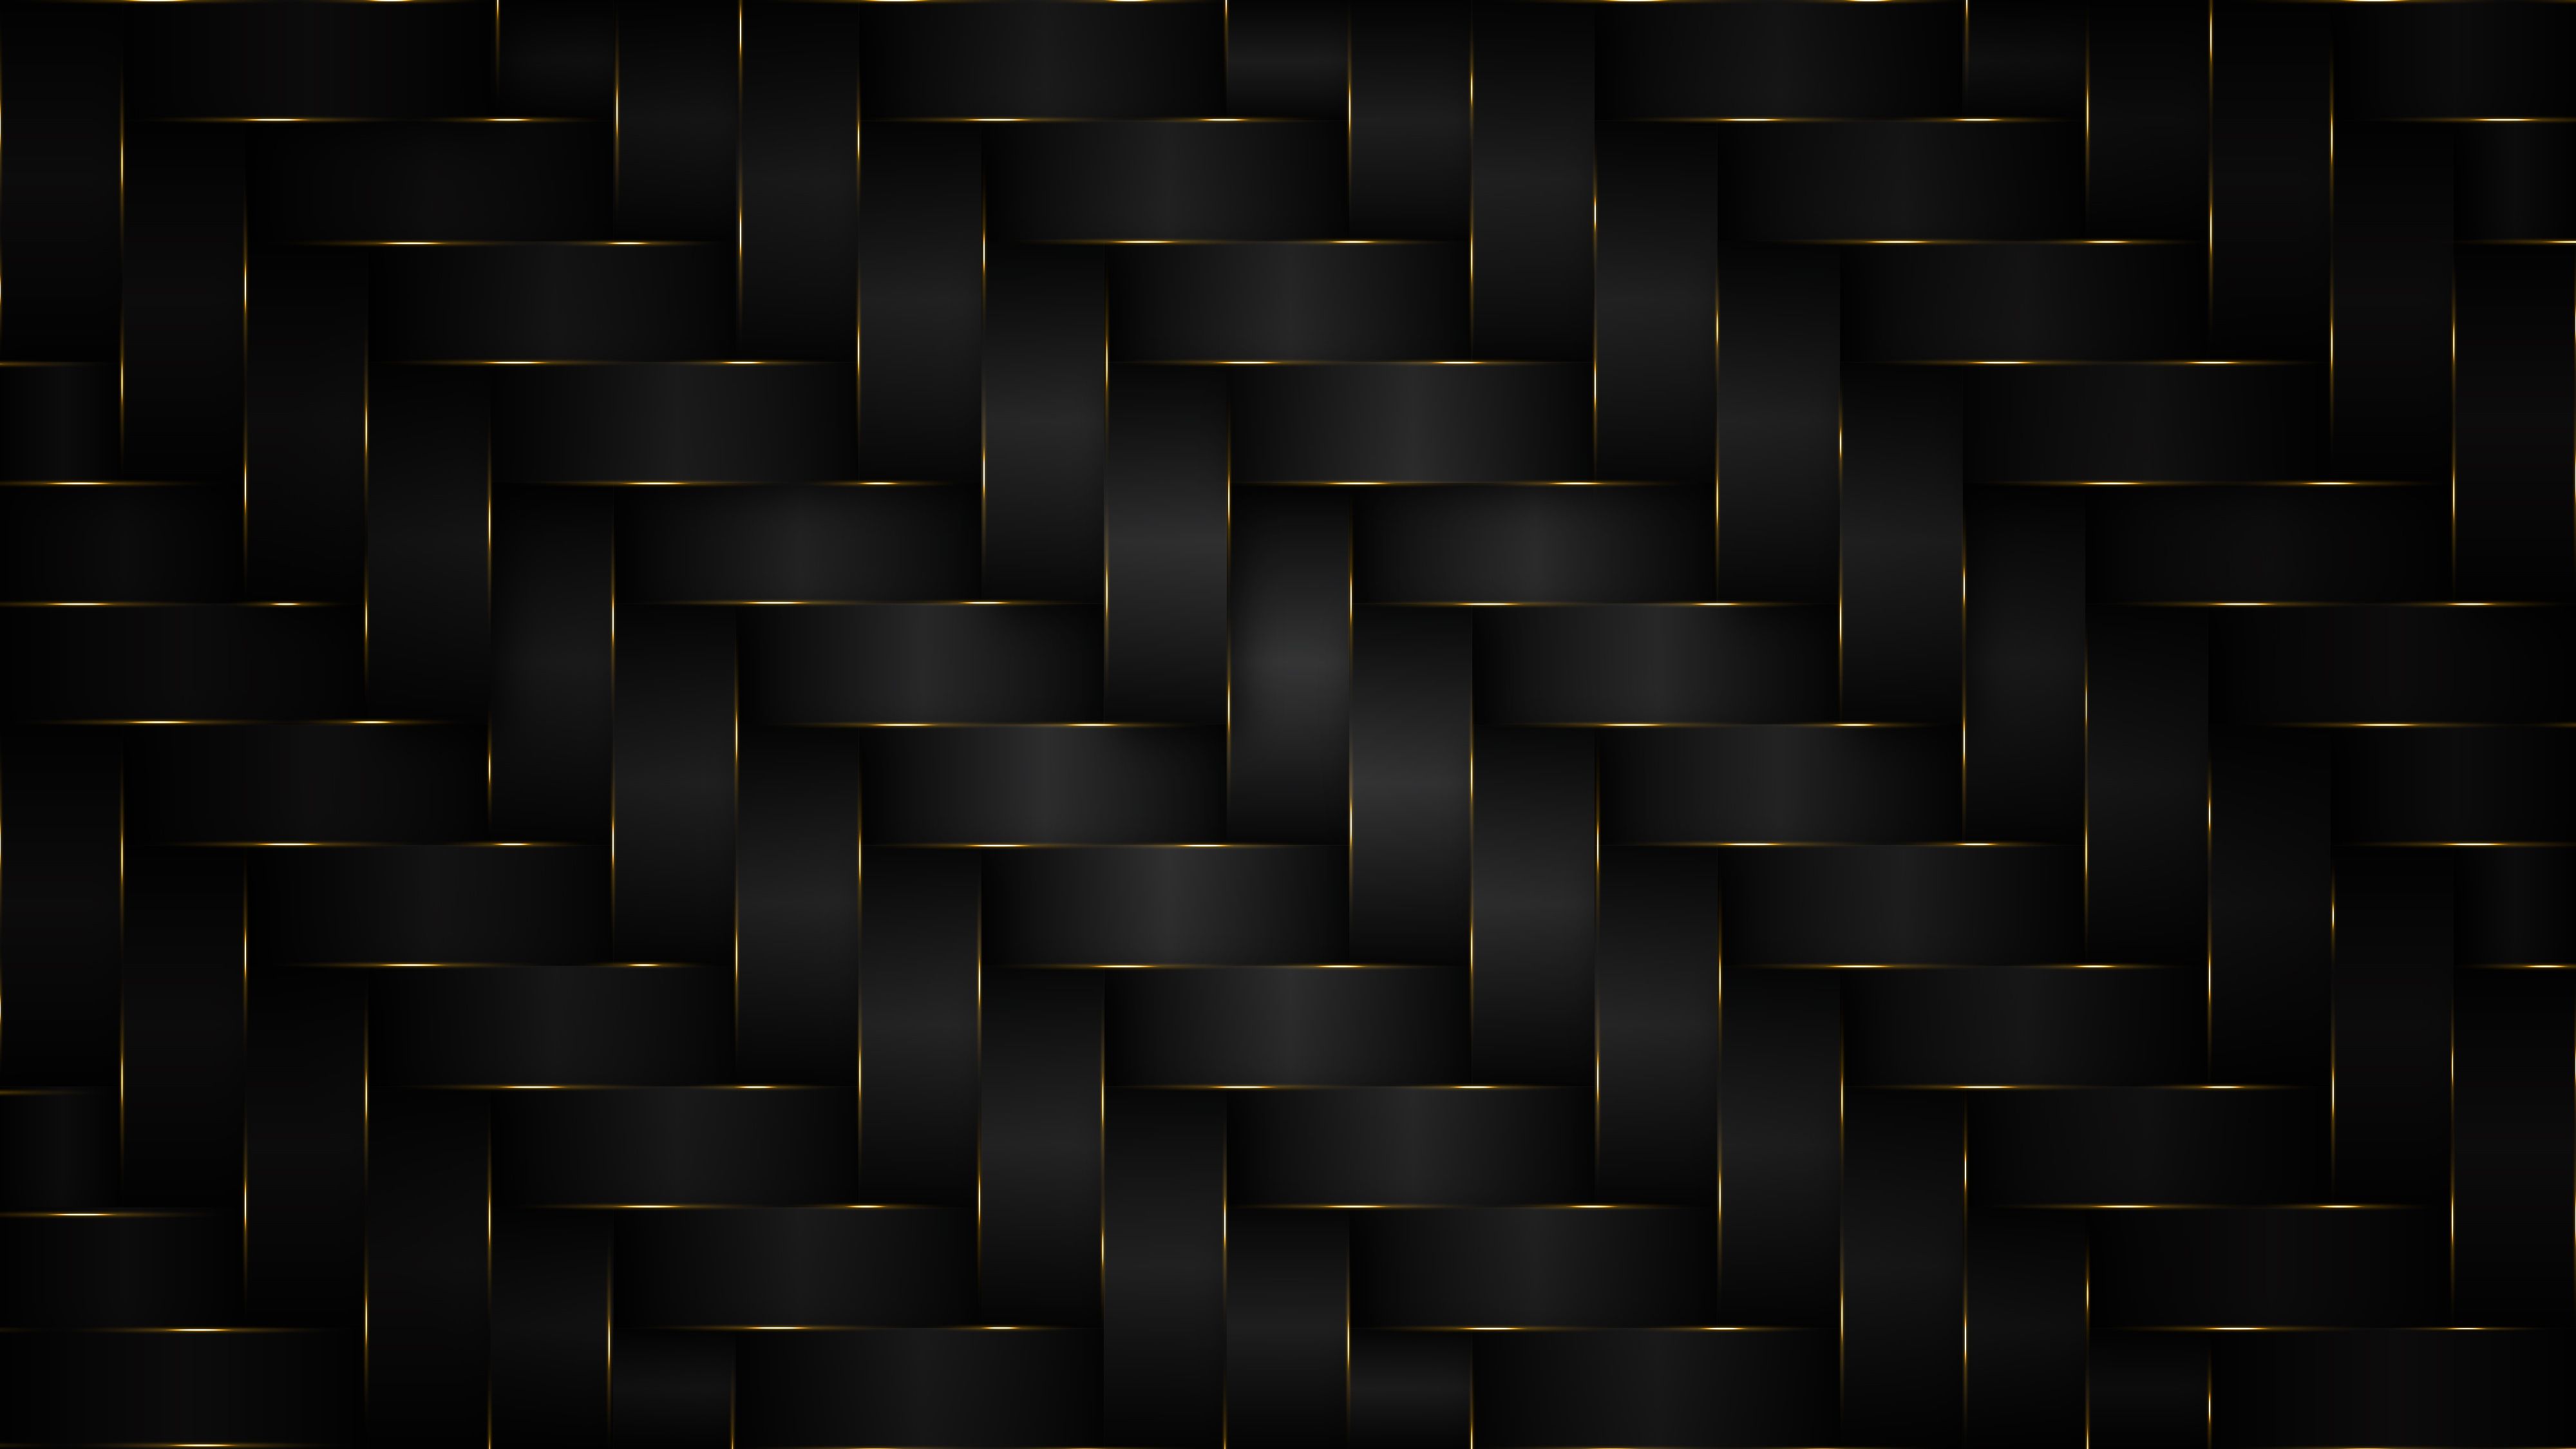 Black and Gold Wallpapers on WallpaperDog